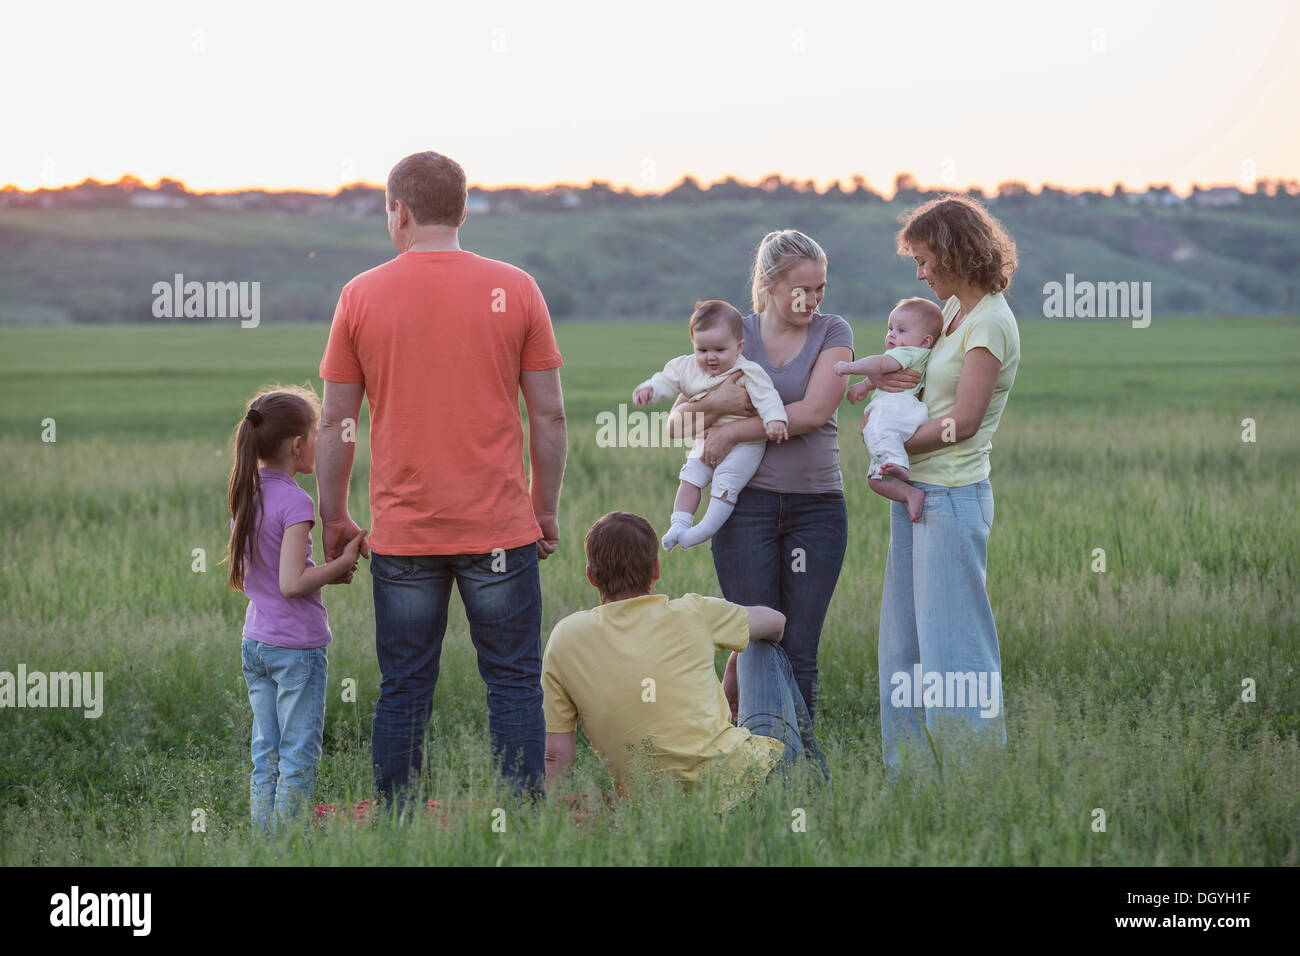 Two families relaxing in a field in a rural setting Stock Photo